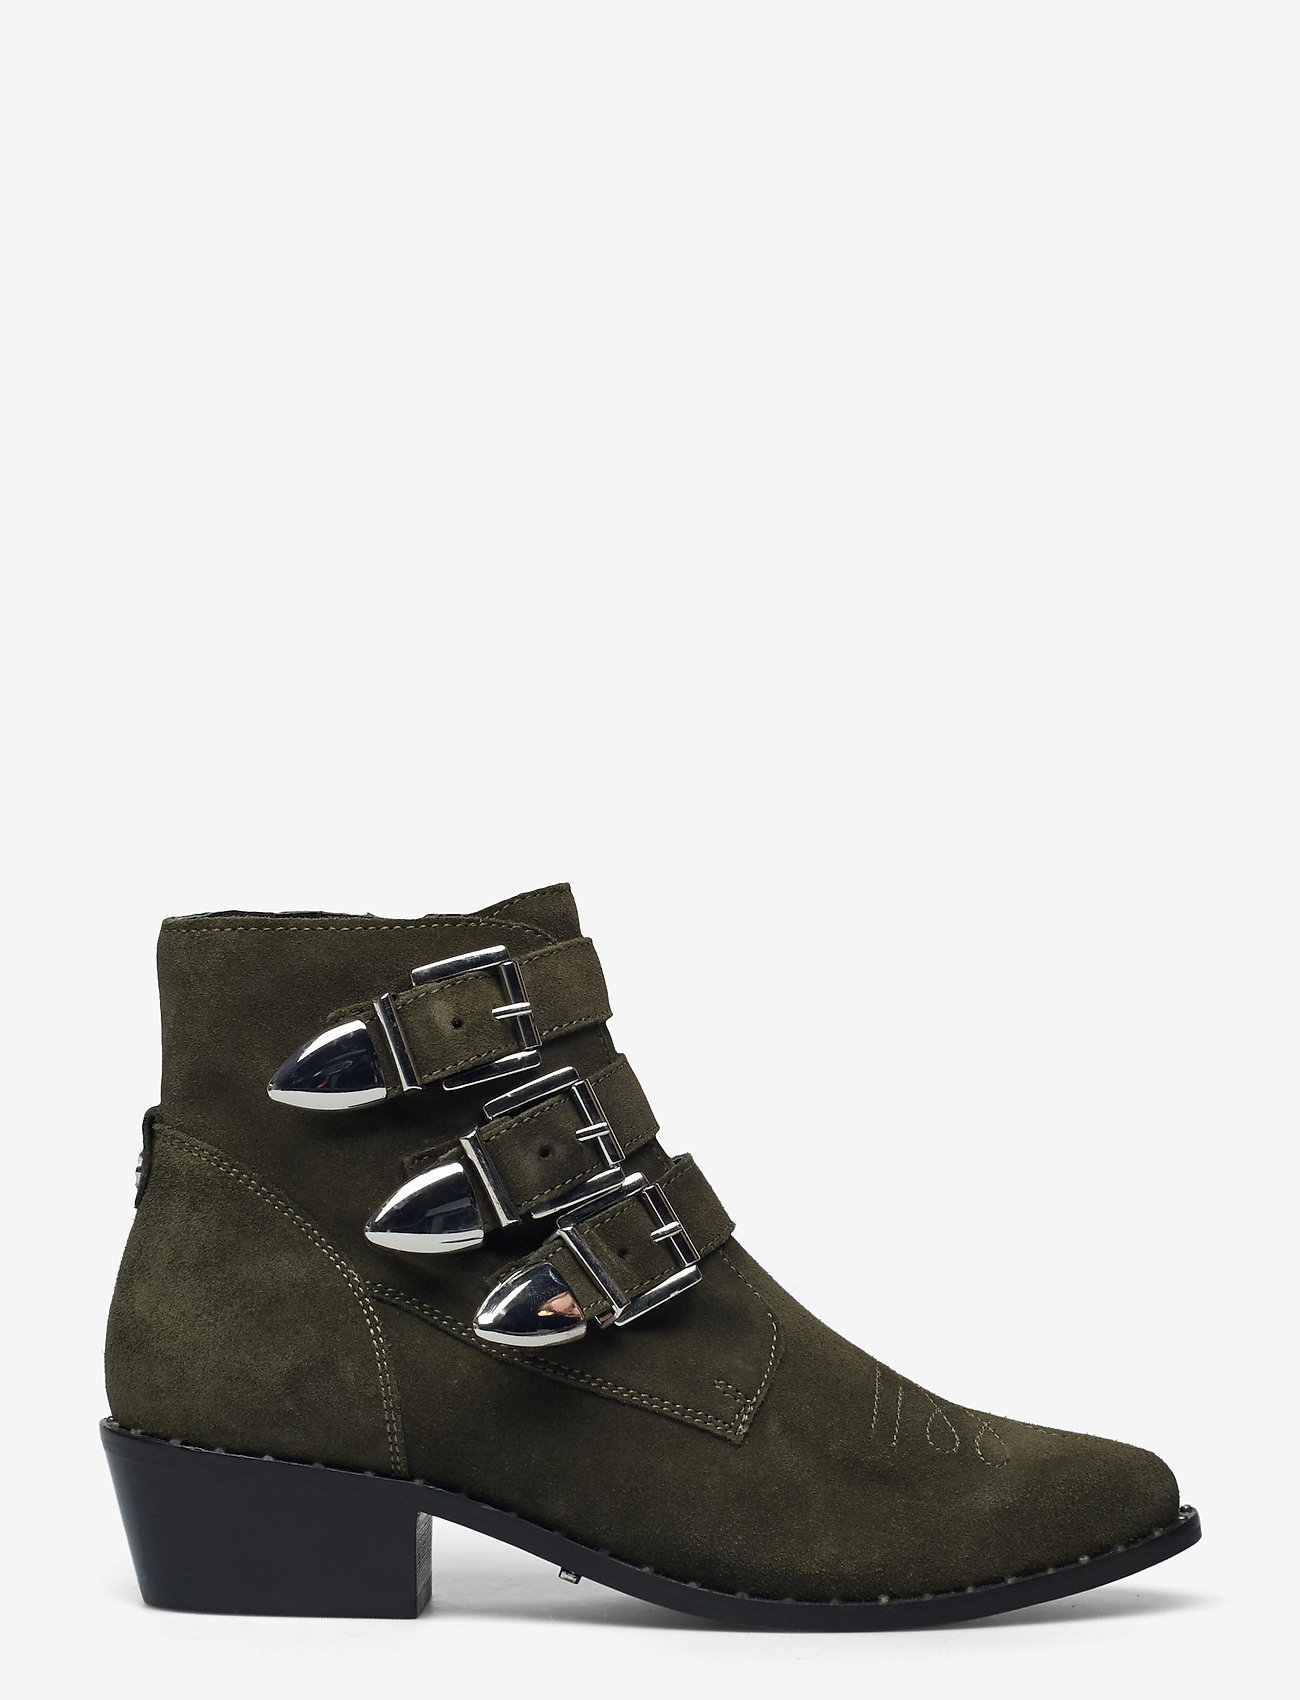 Mexx - Boot - flat ankle boots - olive - 1